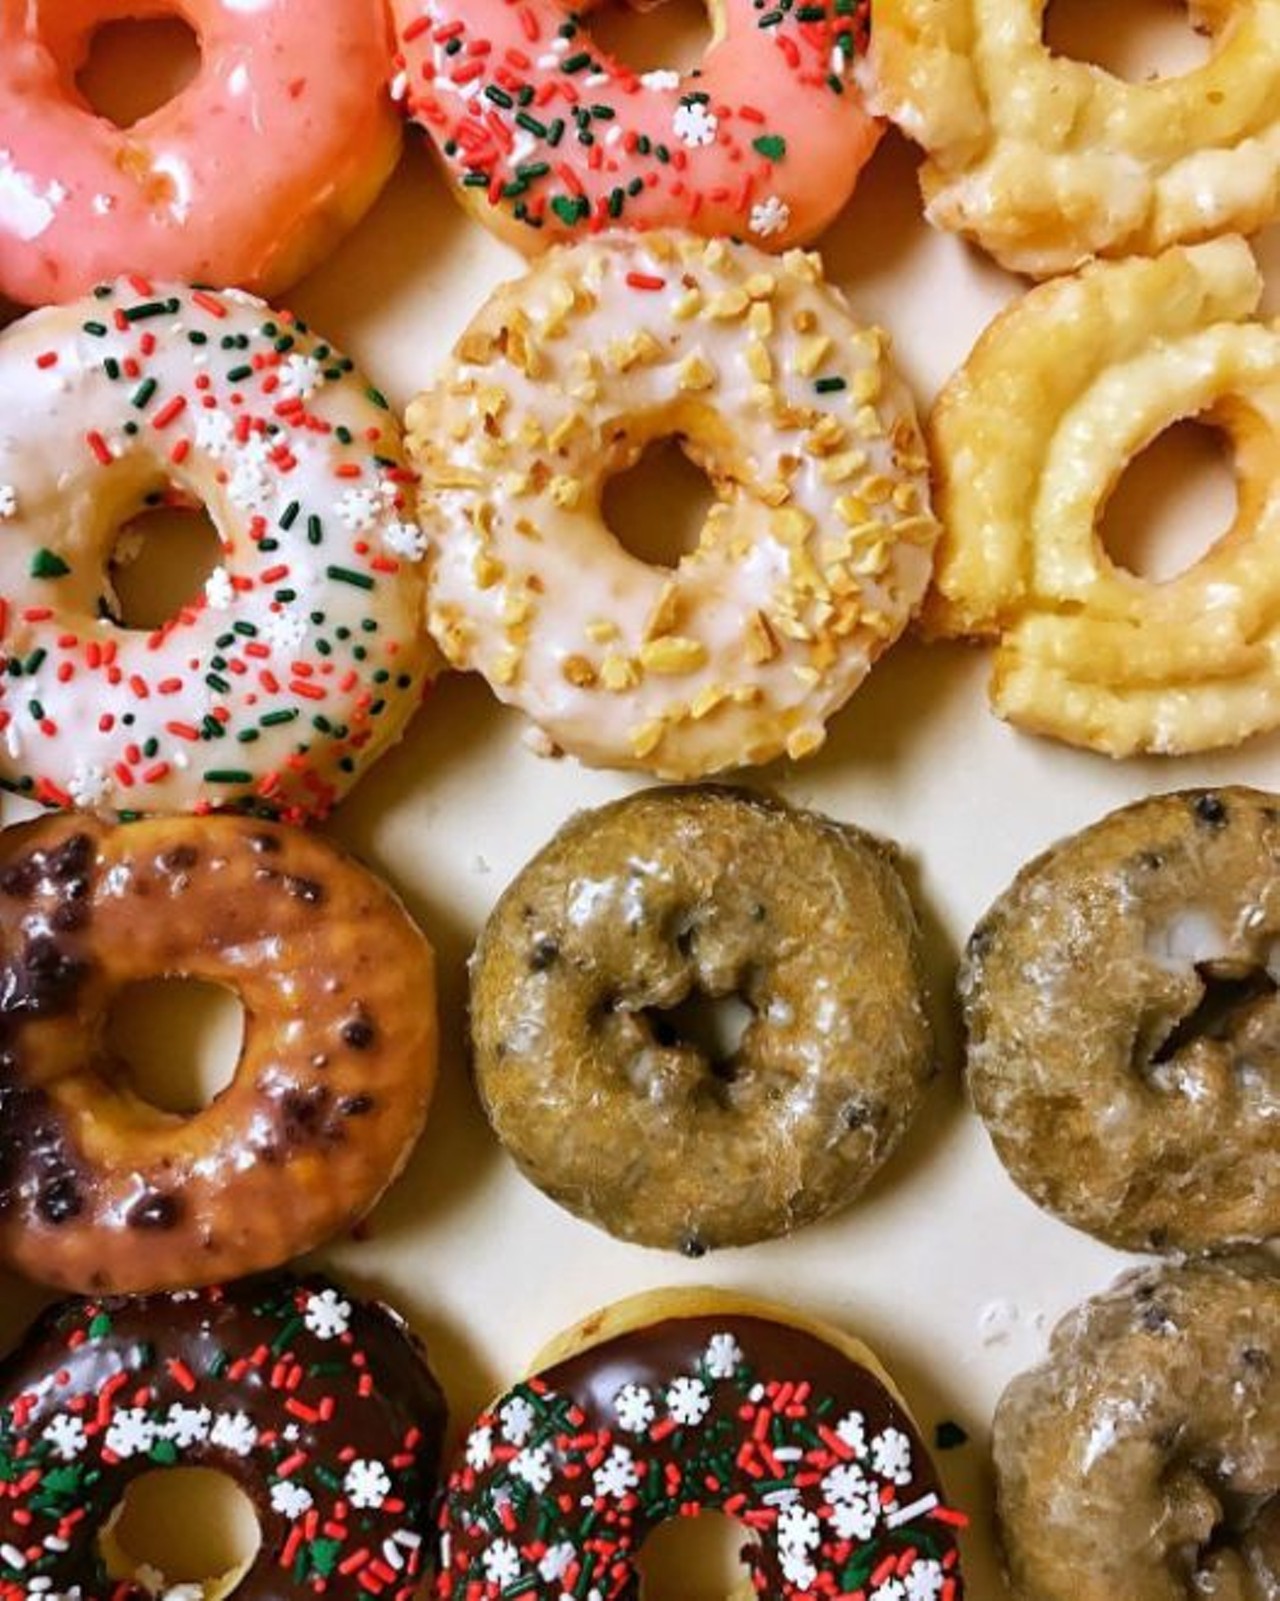 Super Donuts
Multiple locations
With several locations throughout the city, you can track down the Super Donuts closest to you and guarantee it's going to be your newest donut go-to.Photo via Instagram, s.a.vortooth